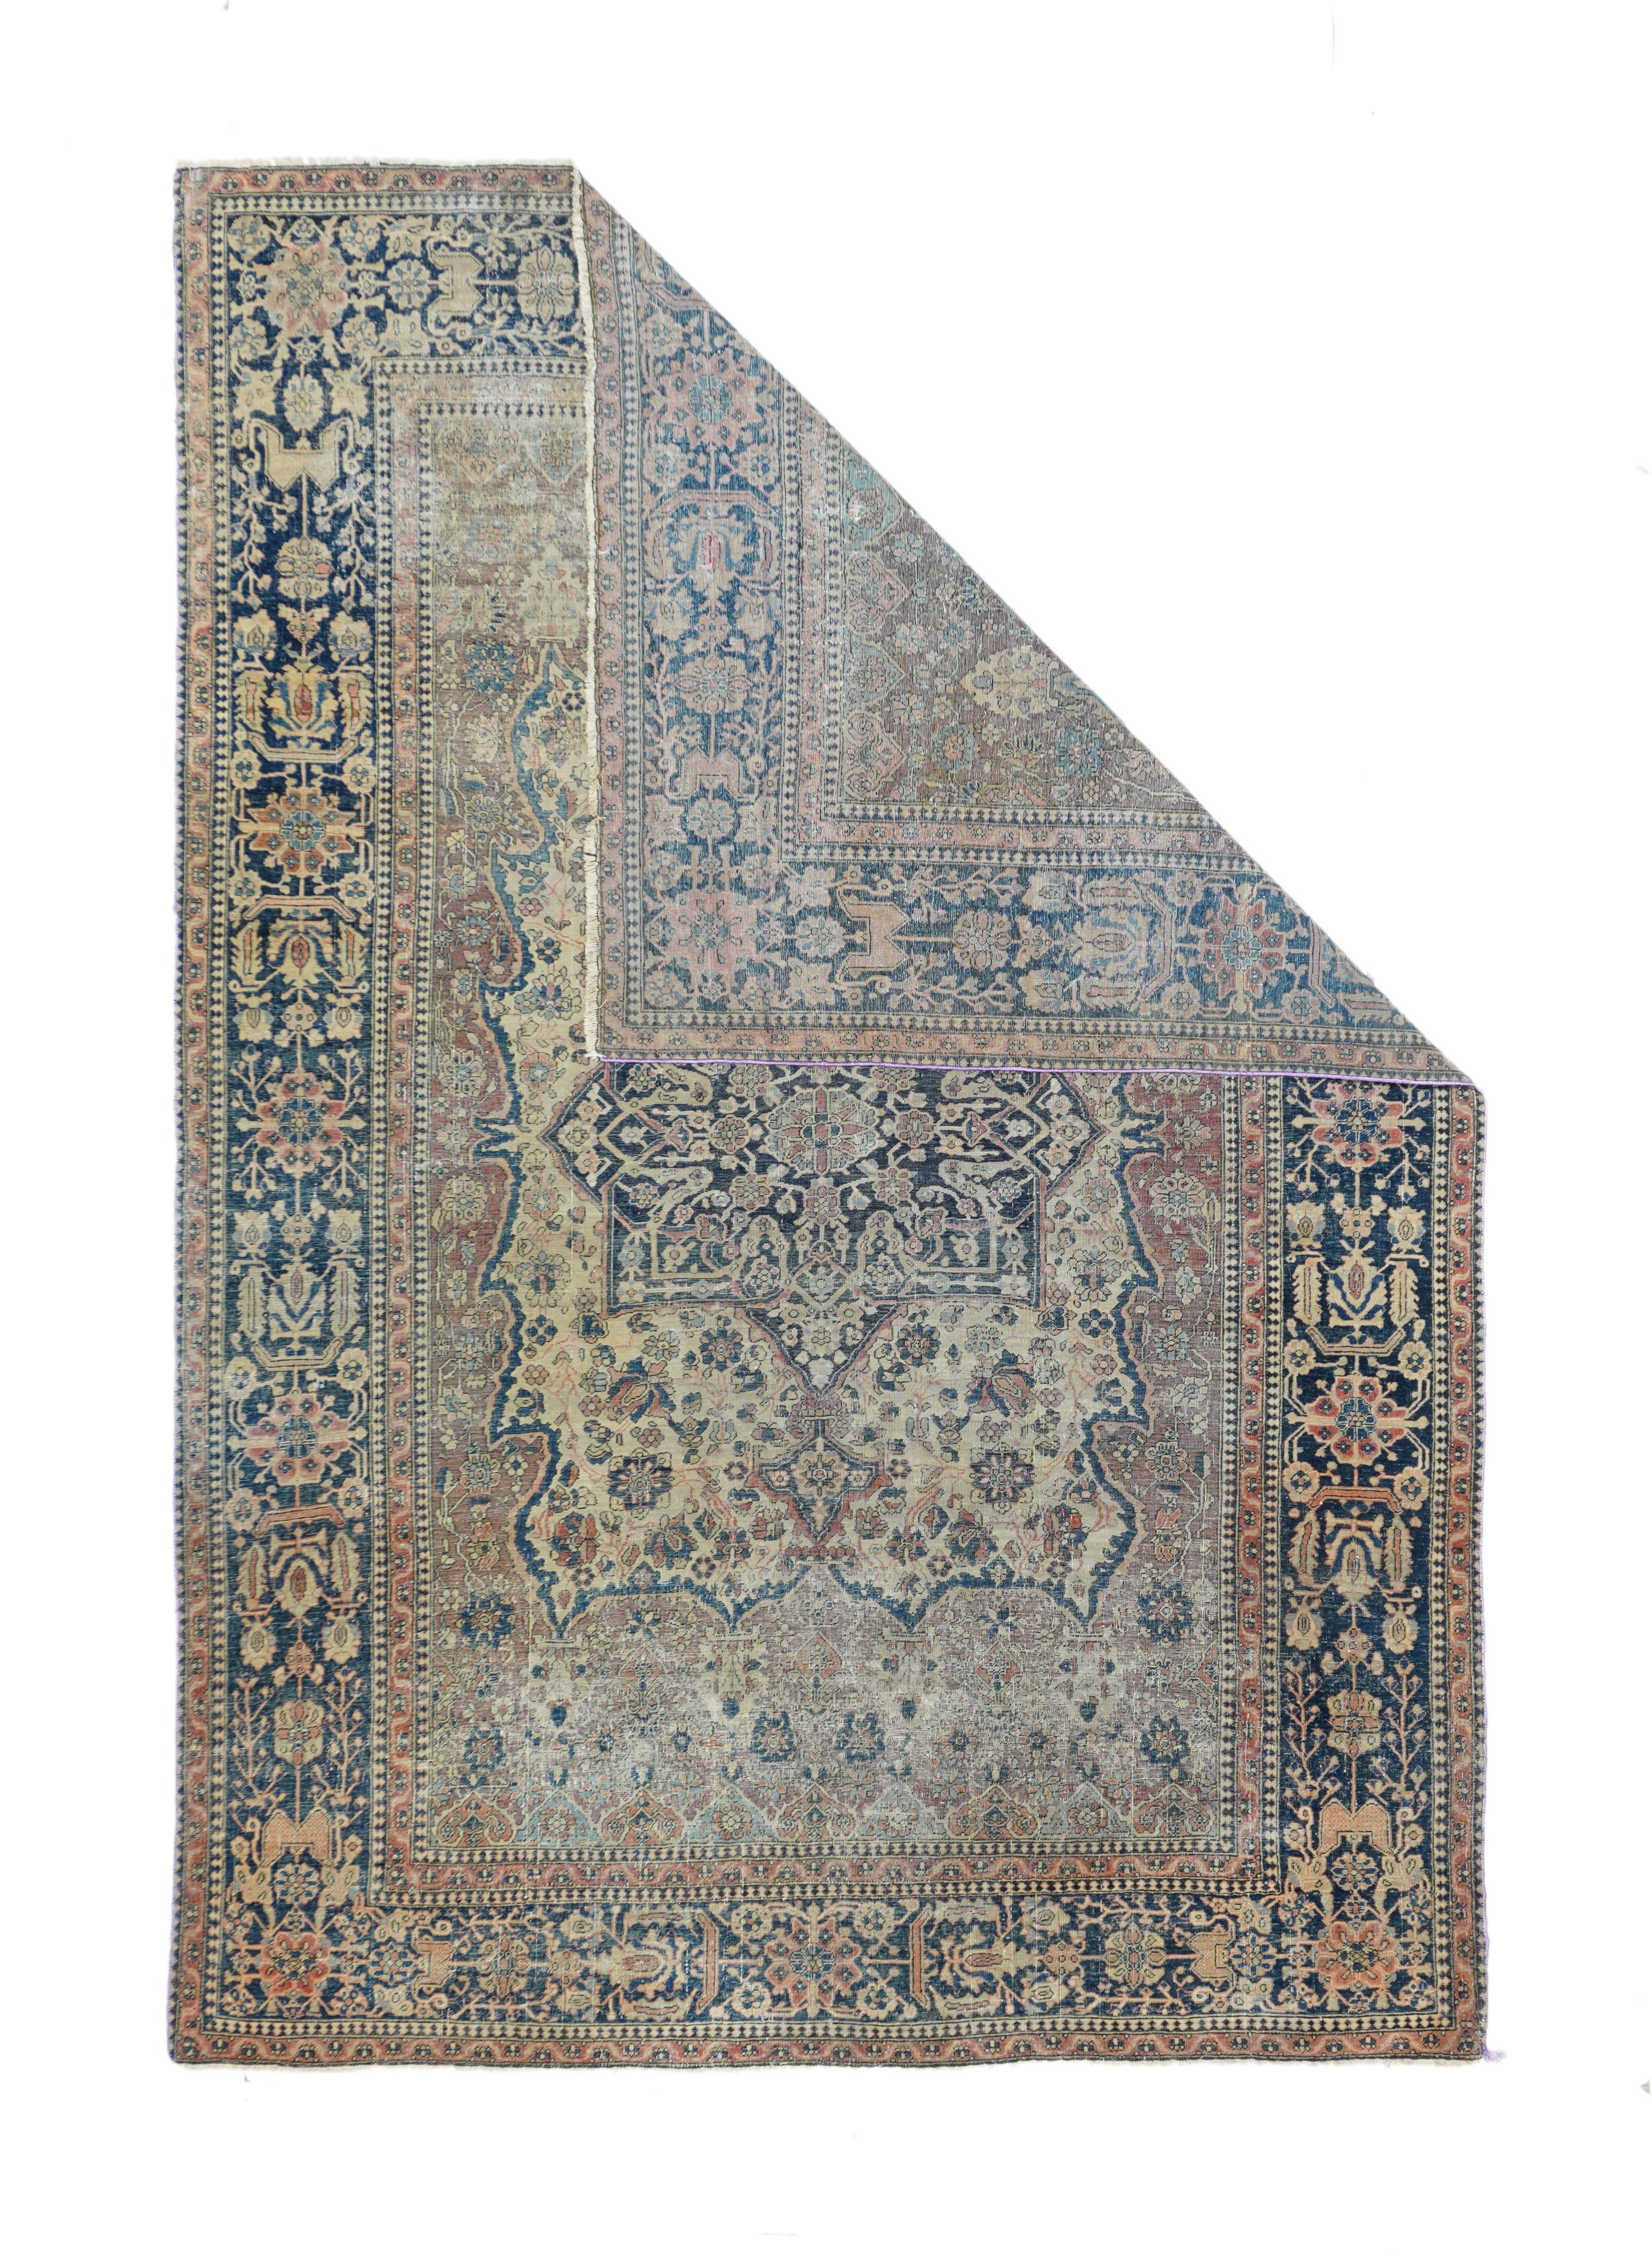 Although in only fair condition with wear abrash, this central Persian, finely woven, town scatter still possesses real character. The rust red field with an allover flower pattern supports a rectangular ivory subfield with a curvilinear bracket